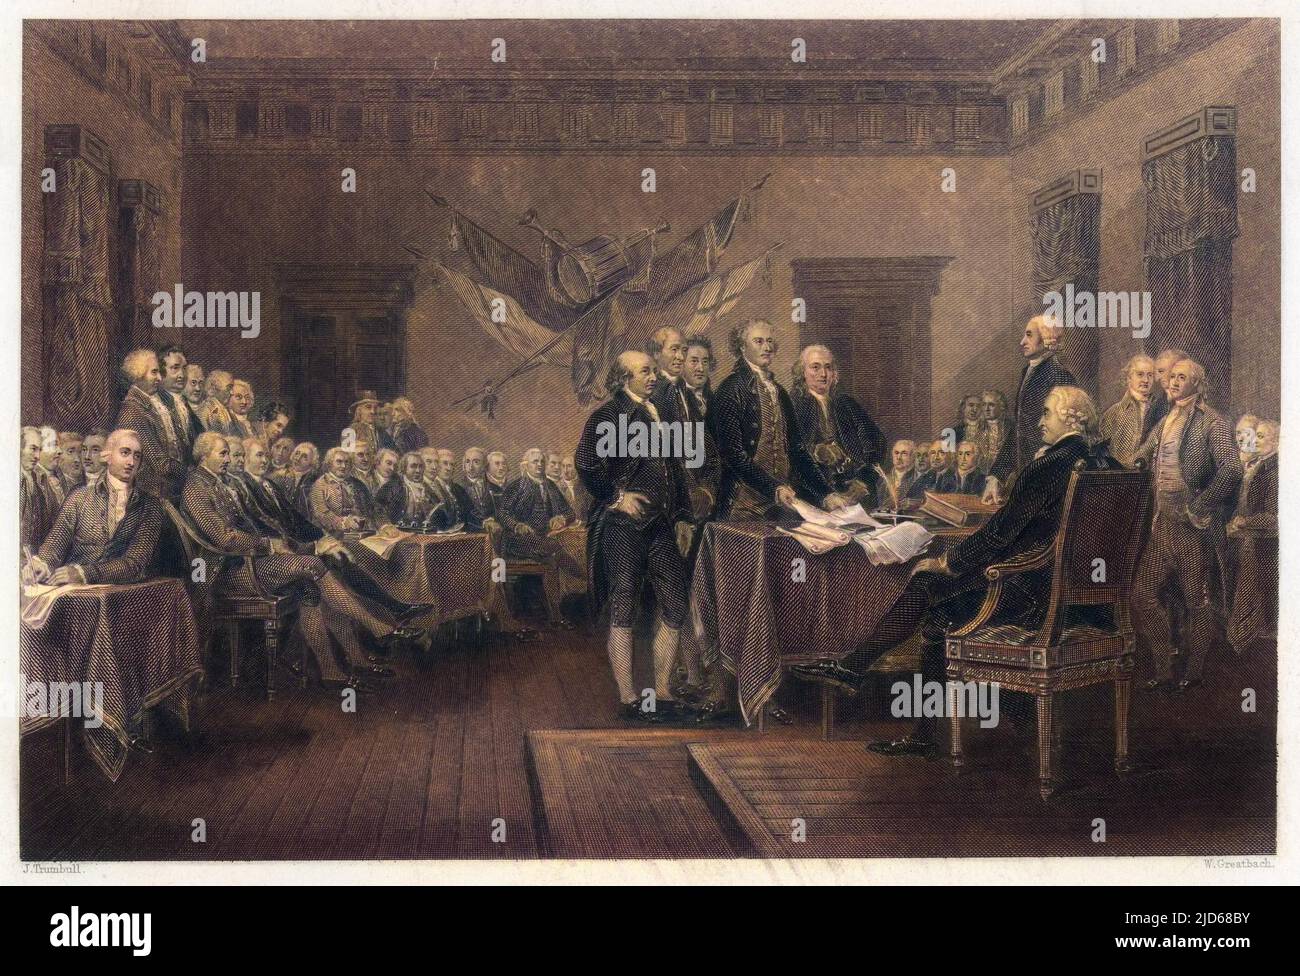 The signing of the Declaration of Independence in Philadelphia Colourised version of : 10086290       Date: 4 July 1776 Stock Photo